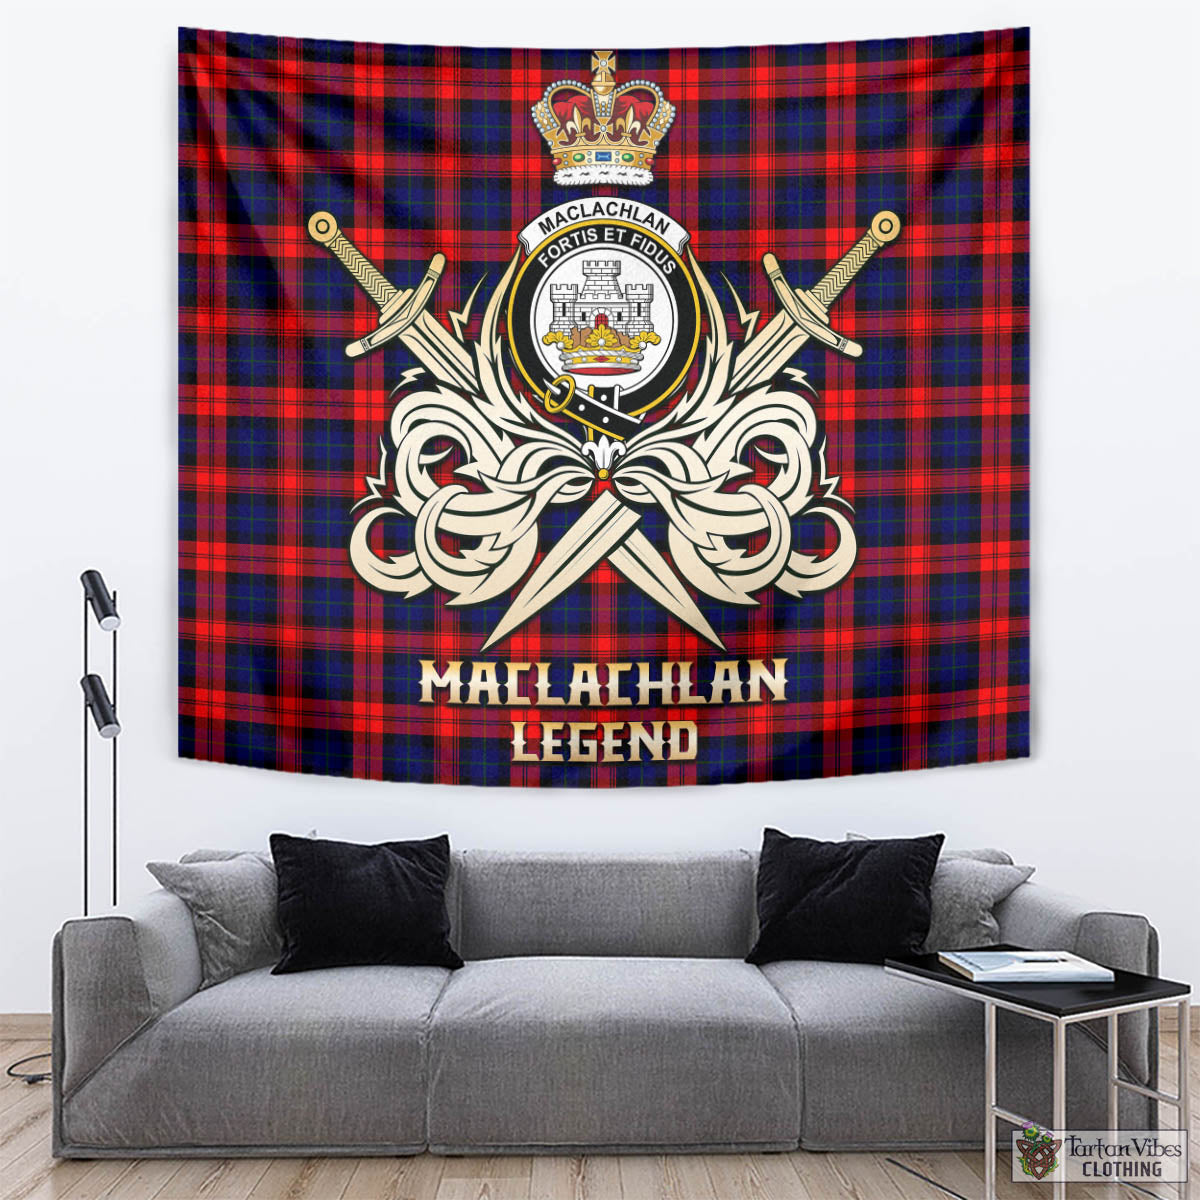 Tartan Vibes Clothing MacLachlan Modern Tartan Tapestry with Clan Crest and the Golden Sword of Courageous Legacy